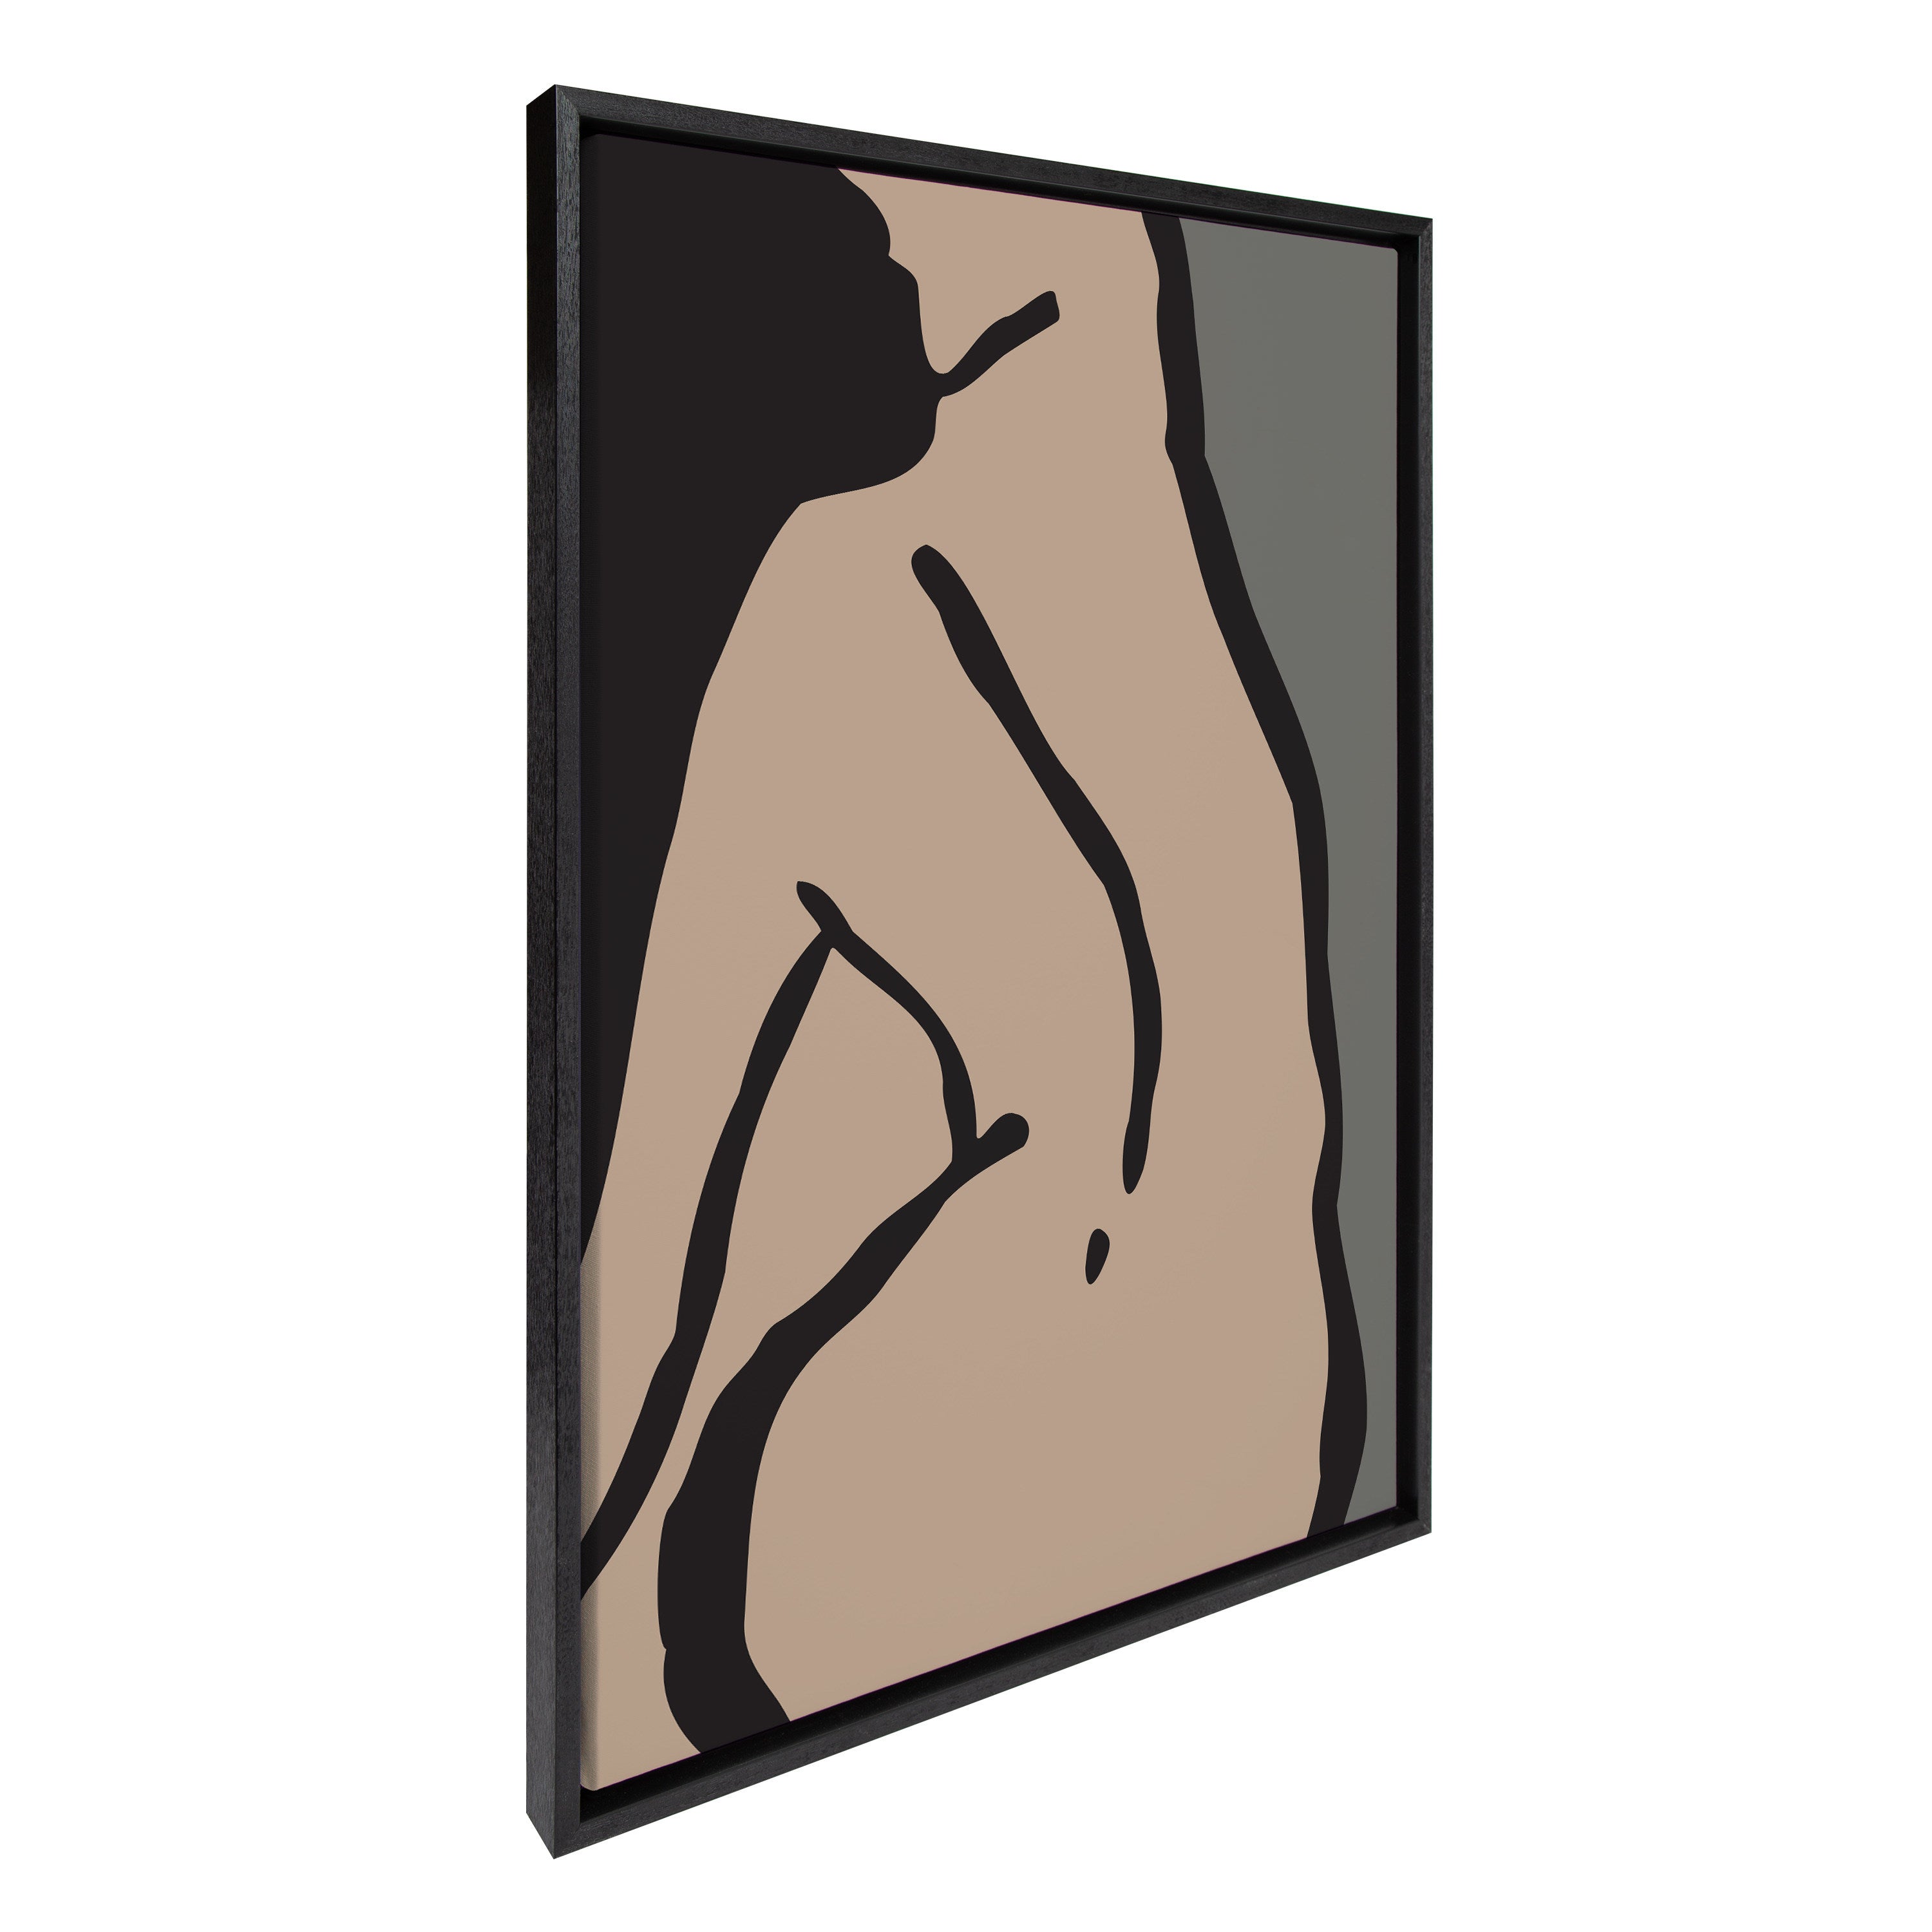 Sylvie Moody Feminine Figural Drawing 2 Framed Canvas by The Creative Bunch Studio